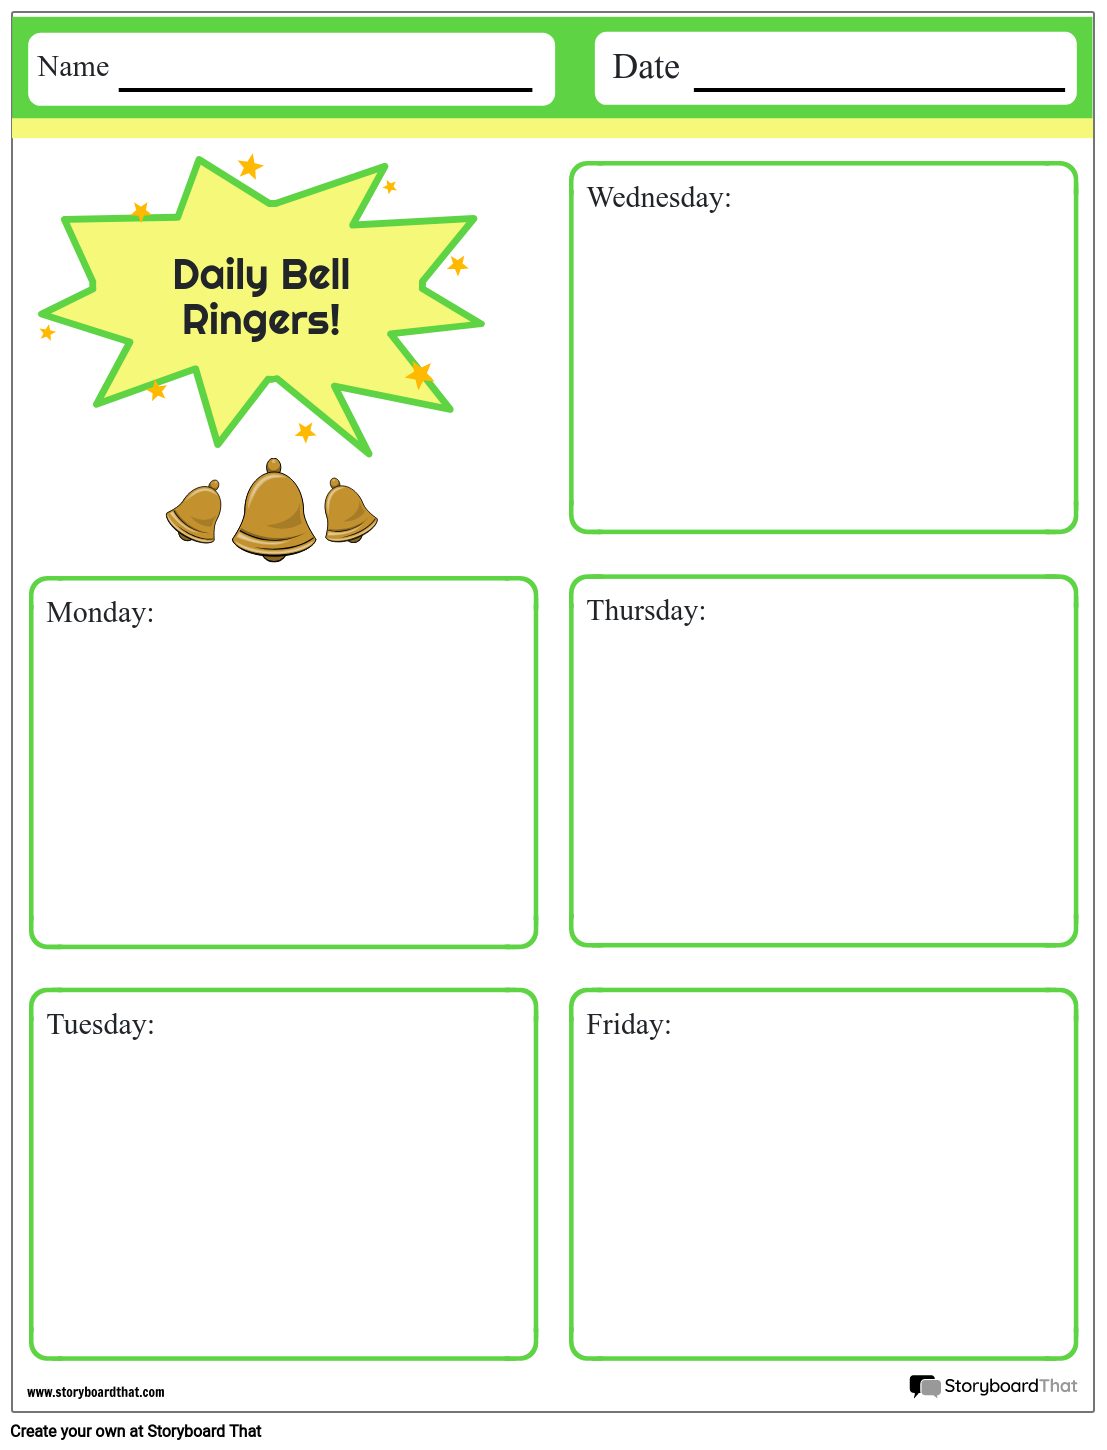 daily-bell-ringers-2-storyboard-by-worksheet-templates